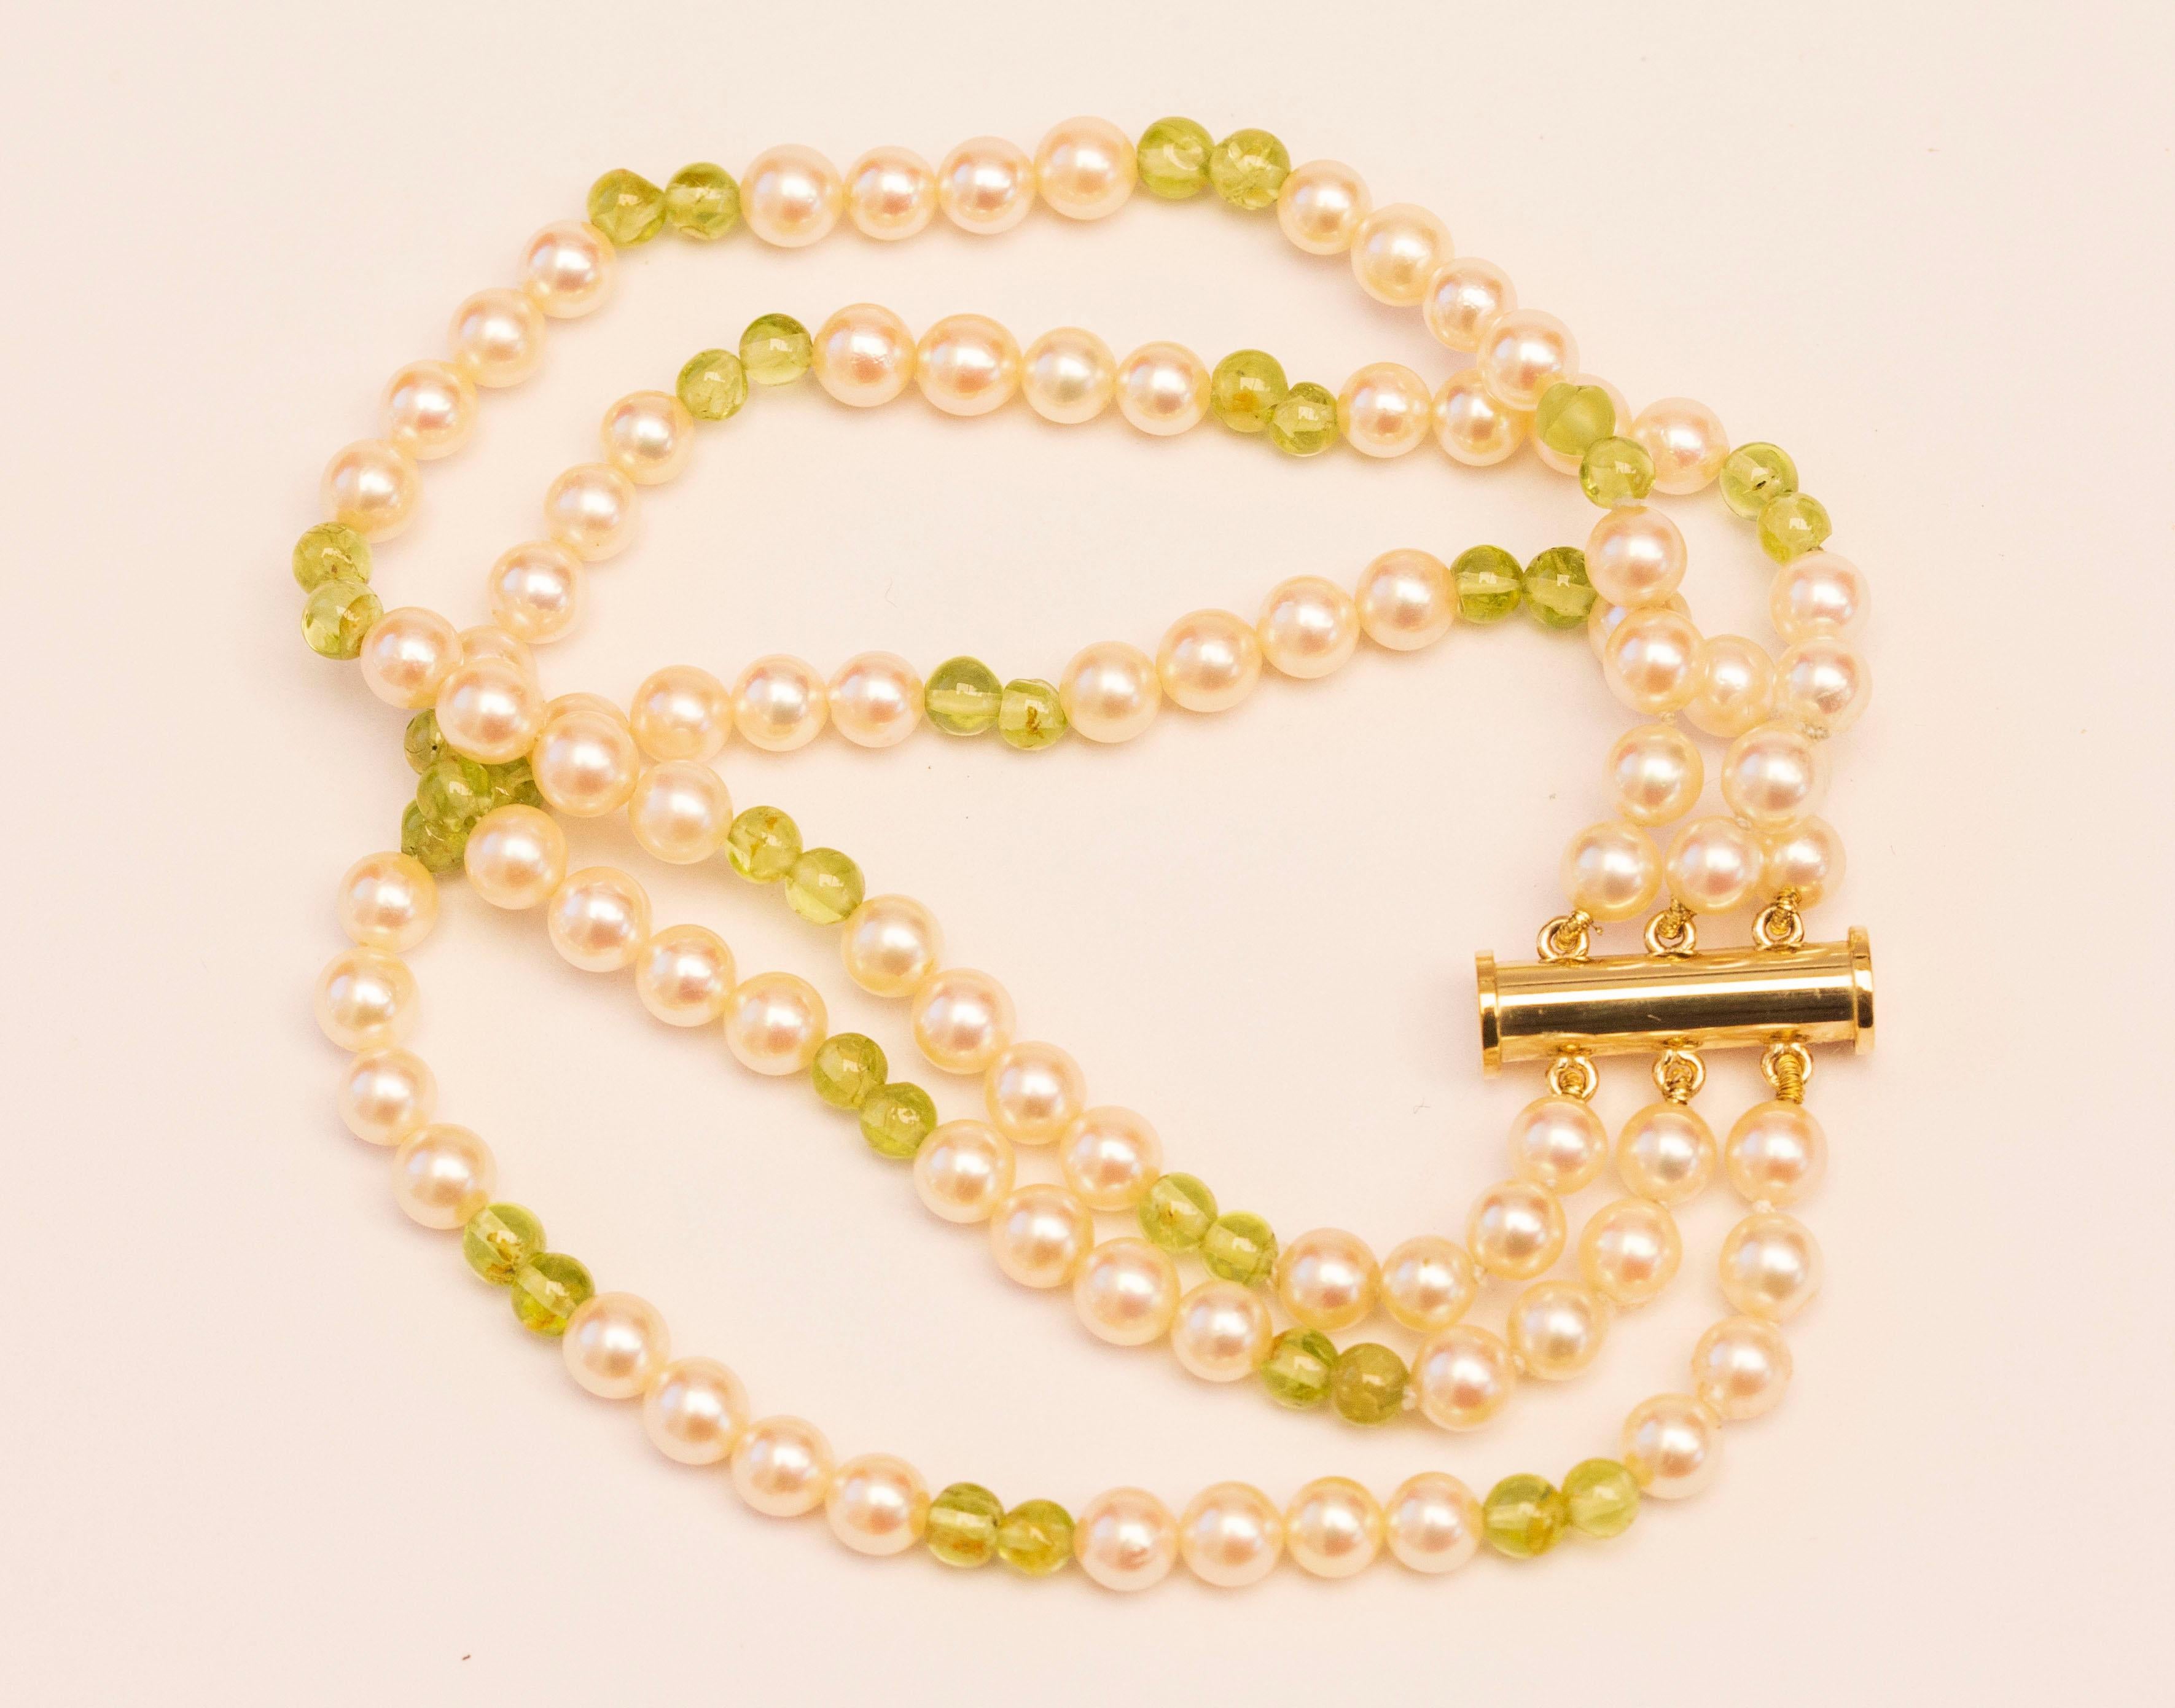 A vintage triple strand cultured pearl and peridot bracelet with 14 karat yellow gold magnetic closure. The bracelet was manufactured by the German JKa Kohle Company of Pforzheim in CA. 1970s. The closure is stamped with JKa and 585 that stands for